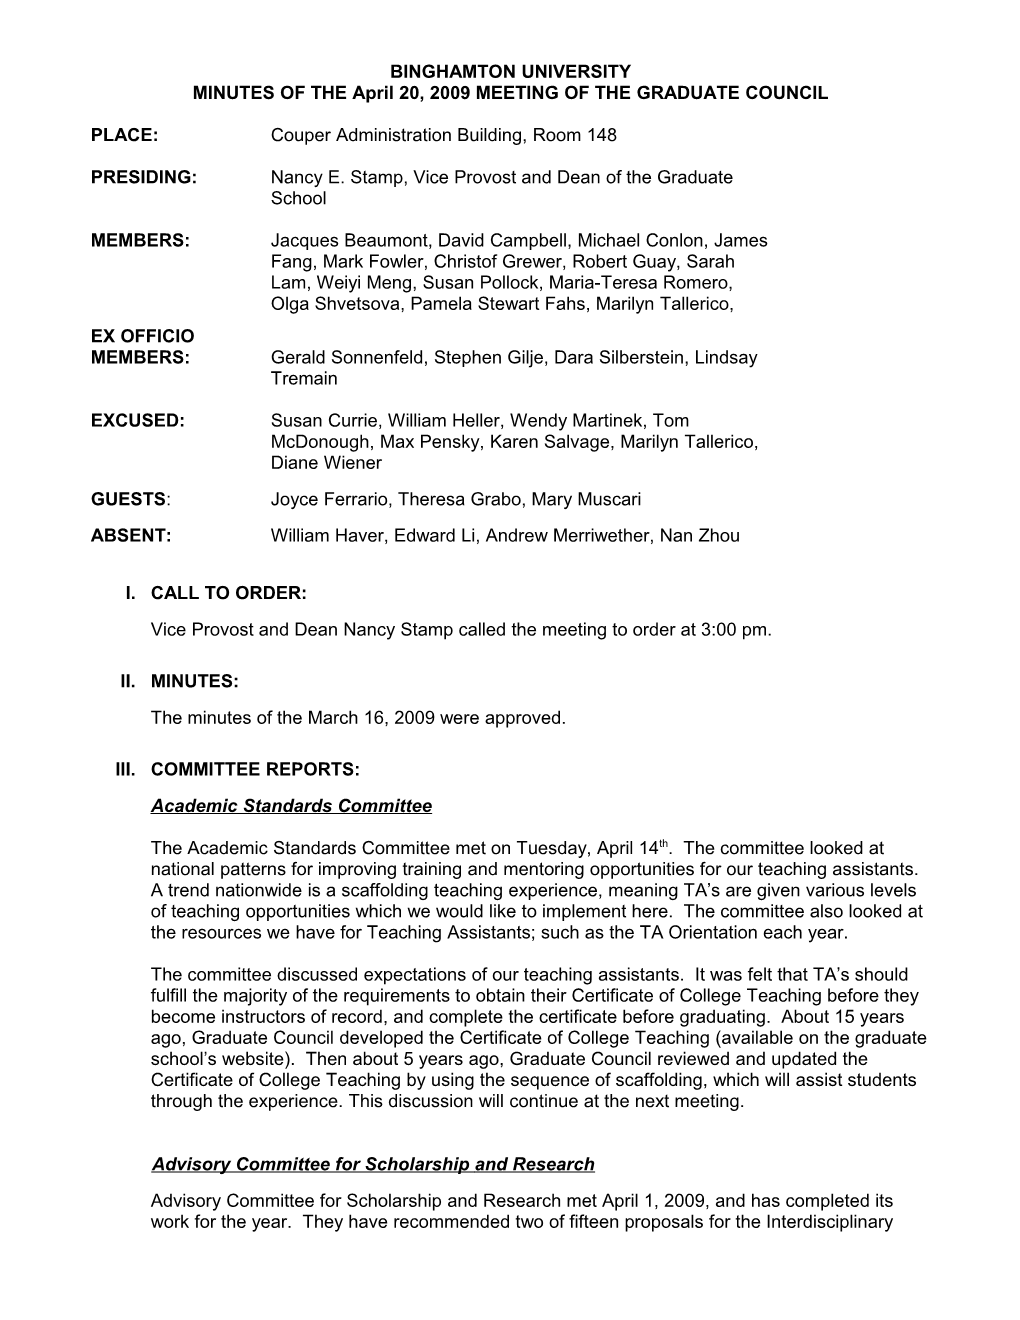 MINUTES of the April 20, 2009MEETING of the GRADUATE COUNCIL